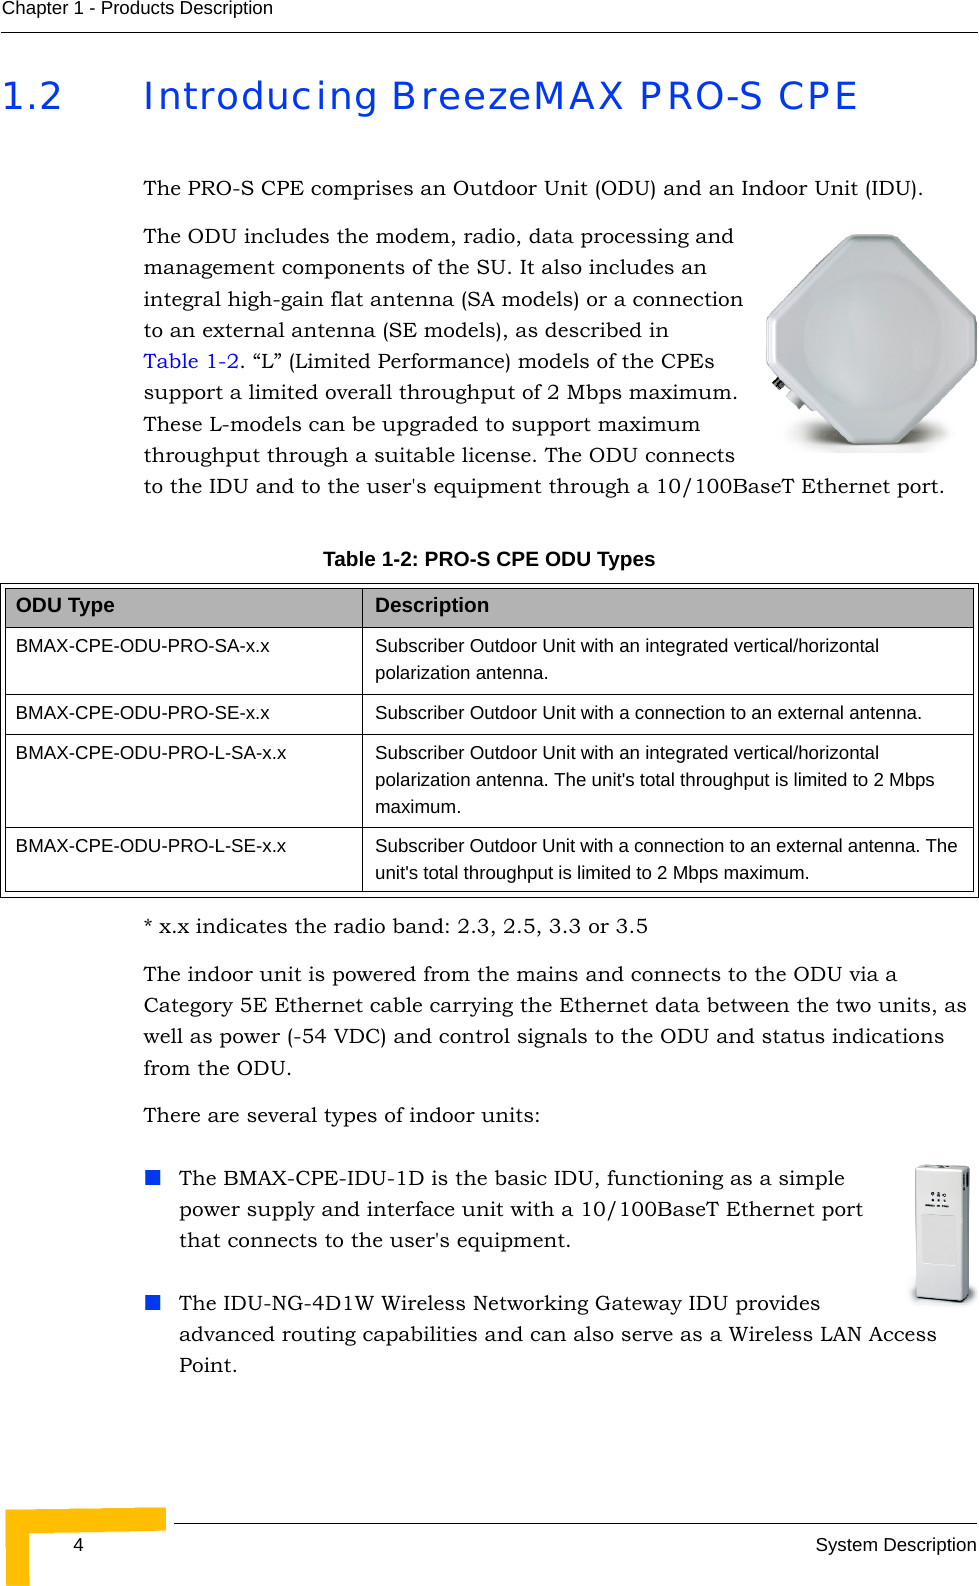 4System DescriptionChapter 1 - Products Description1.2 Introducing BreezeMAX PRO-S CPEThe PRO-S CPE comprises an Outdoor Unit (ODU) and an Indoor Unit (IDU).The ODU includes the modem, radio, data processing and management components of the SU. It also includes an integral high-gain flat antenna (SA models) or a connection to an external antenna (SE models), as described in Table 1-2. “L” (Limited Performance) models of the CPEs support a limited overall throughput of 2 Mbps maximum. These L-models can be upgraded to support maximum throughput through a suitable license. The ODU connects to the IDU and to the user&apos;s equipment through a 10/100BaseT Ethernet port.* x.x indicates the radio band: 2.3, 2.5, 3.3 or 3.5The indoor unit is powered from the mains and connects to the ODU via a Category 5E Ethernet cable carrying the Ethernet data between the two units, as well as power (-54 VDC) and control signals to the ODU and status indications from the ODU. There are several types of indoor units:The BMAX-CPE-IDU-1D is the basic IDU, functioning as a simple power supply and interface unit with a 10/100BaseT Ethernet port that connects to the user&apos;s equipment. The IDU-NG-4D1W Wireless Networking Gateway IDU provides advanced routing capabilities and can also serve as a Wireless LAN Access Point.Table 1-2: PRO-S CPE ODU Types ODU Type DescriptionBMAX-CPE-ODU-PRO-SA-x.x Subscriber Outdoor Unit with an integrated vertical/horizontal polarization antenna. BMAX-CPE-ODU-PRO-SE-x.x Subscriber Outdoor Unit with a connection to an external antenna. BMAX-CPE-ODU-PRO-L-SA-x.x Subscriber Outdoor Unit with an integrated vertical/horizontal polarization antenna. The unit&apos;s total throughput is limited to 2 Mbps maximum.BMAX-CPE-ODU-PRO-L-SE-x.x Subscriber Outdoor Unit with a connection to an external antenna. The unit&apos;s total throughput is limited to 2 Mbps maximum.